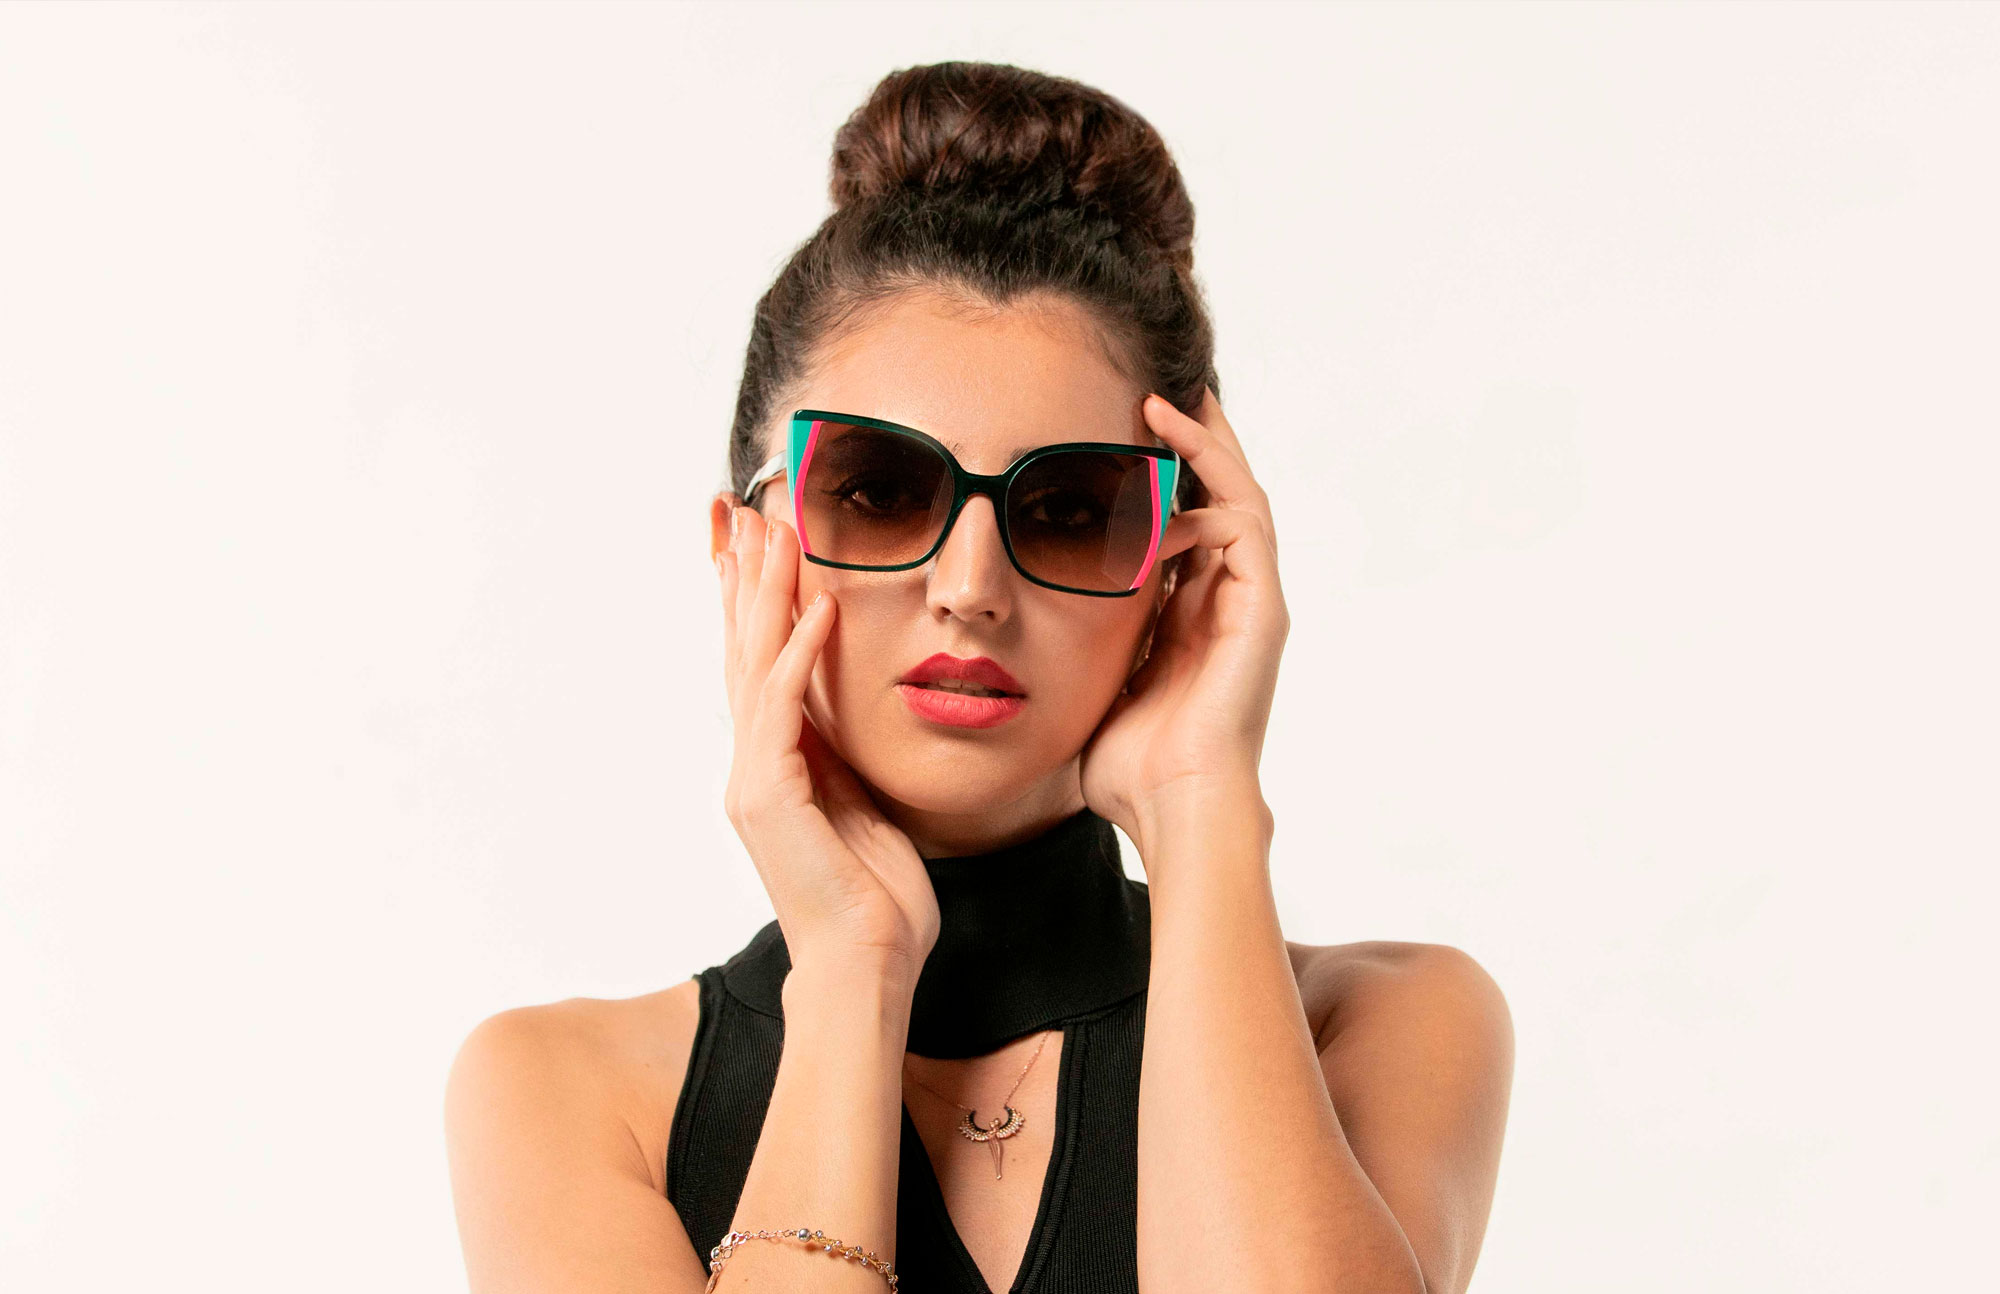 Sunglasses for women with style NYC fashion